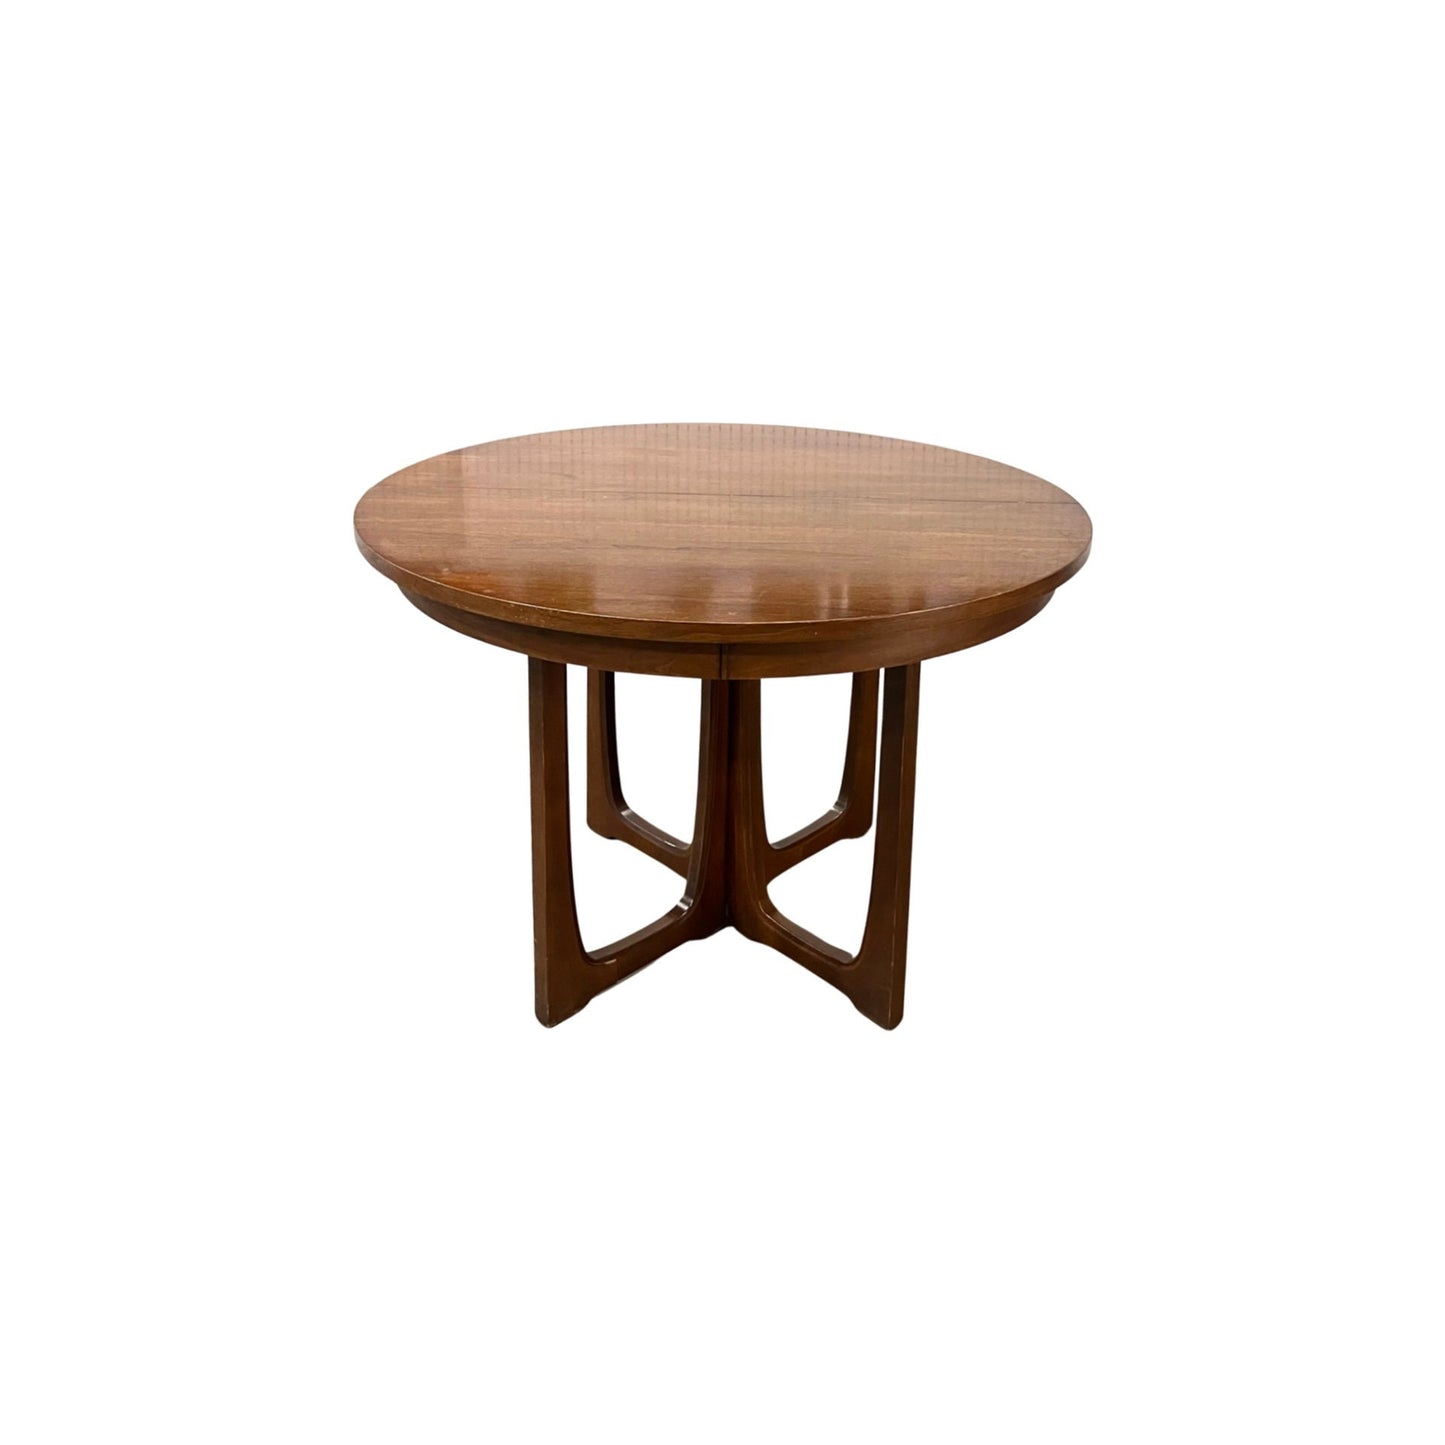 Broyhill Emphasis Mid Century Dining Table - Circular View